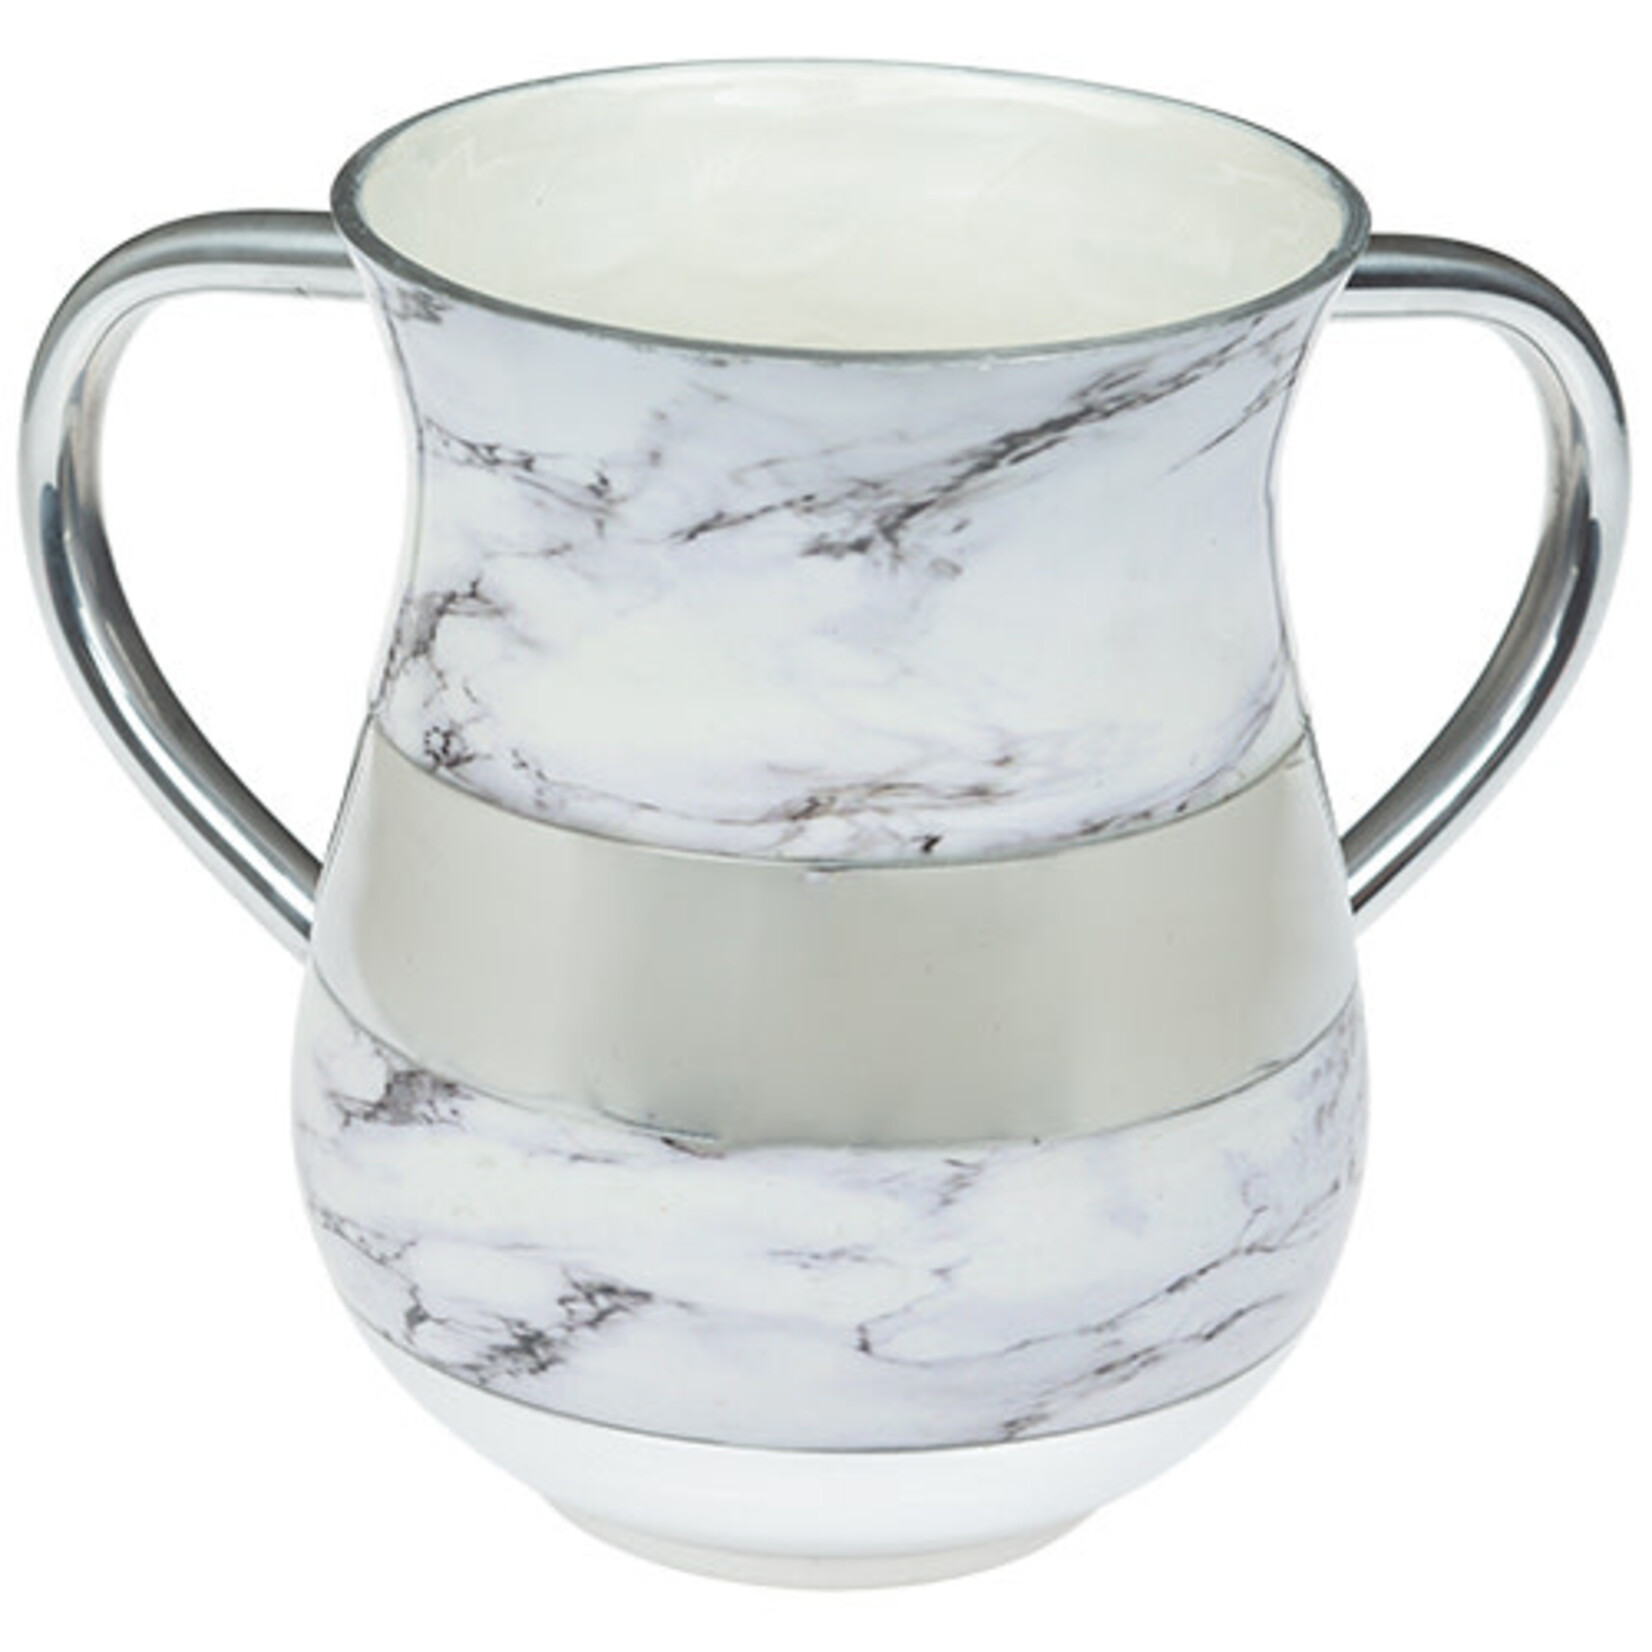 Aluminum Wash Cup - White Marble